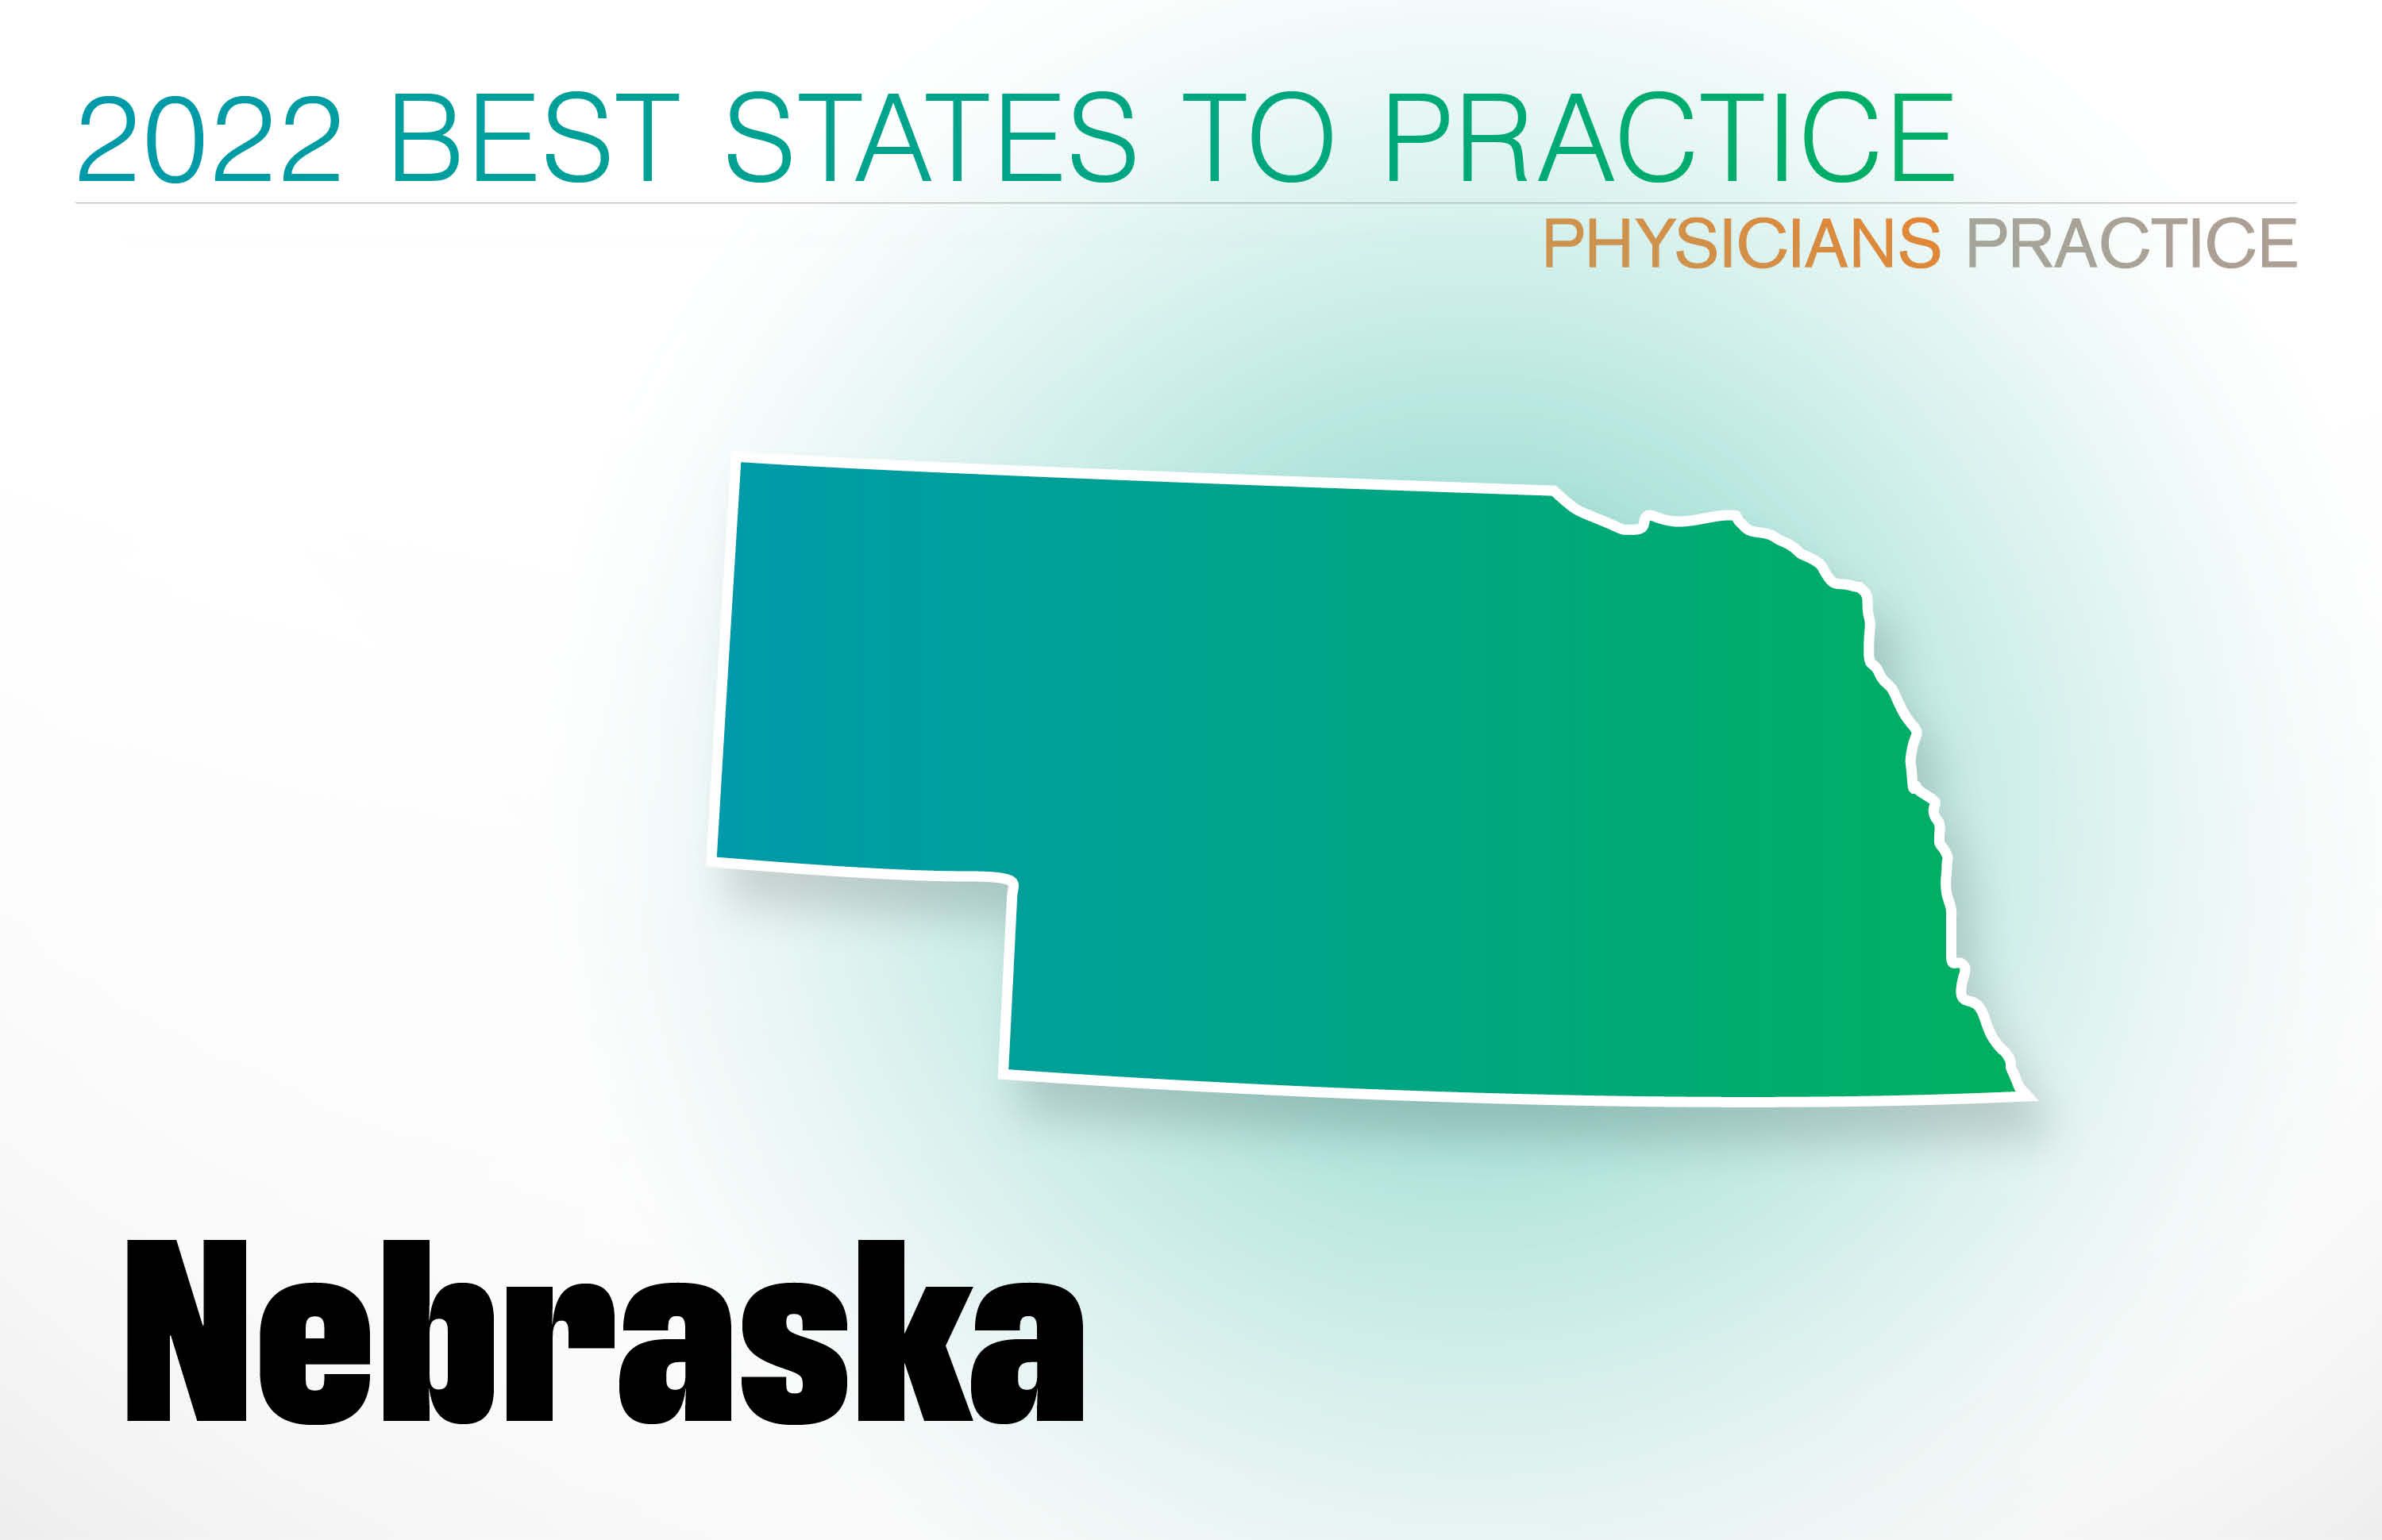 #15 Nebraska Rankings: Cost of living: 15 Physician density: 17 Amount of state business taxes collected: 35 Average malpractice insurance rates: 19 Quality of life: 32 GPCI: 1